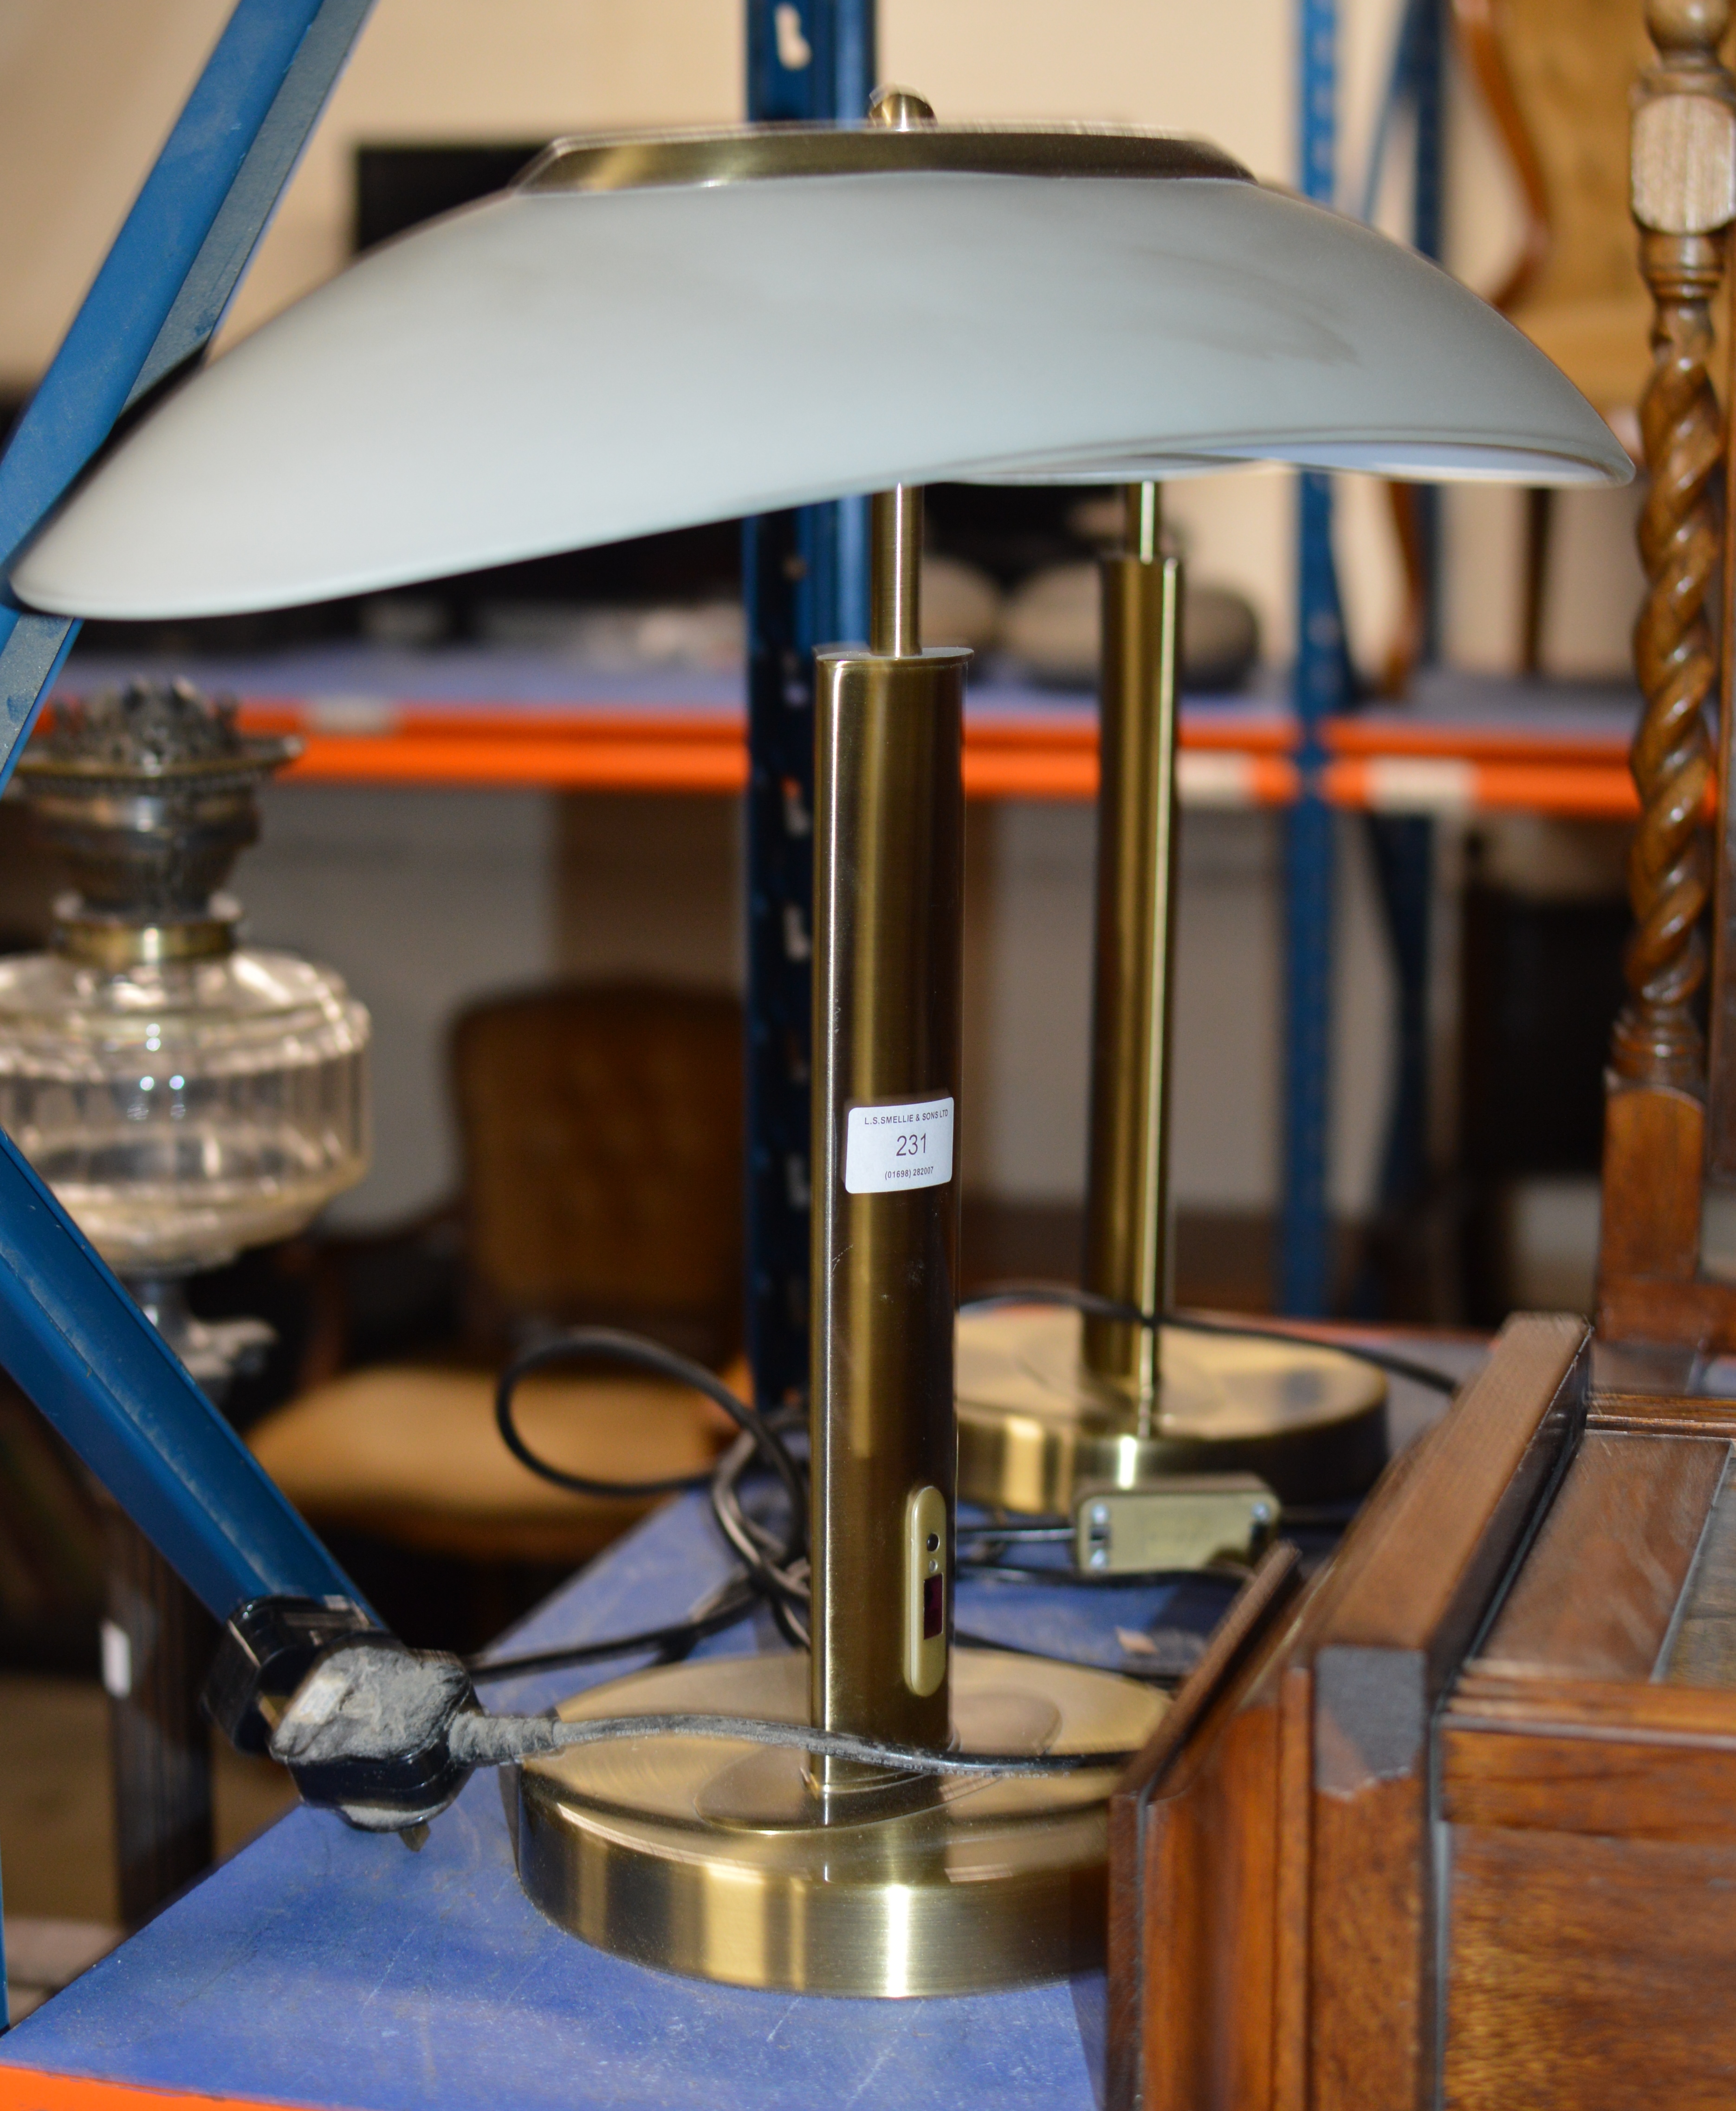 PAIR OF MODERN TABLE LAMPS WITH GLASS SHADES